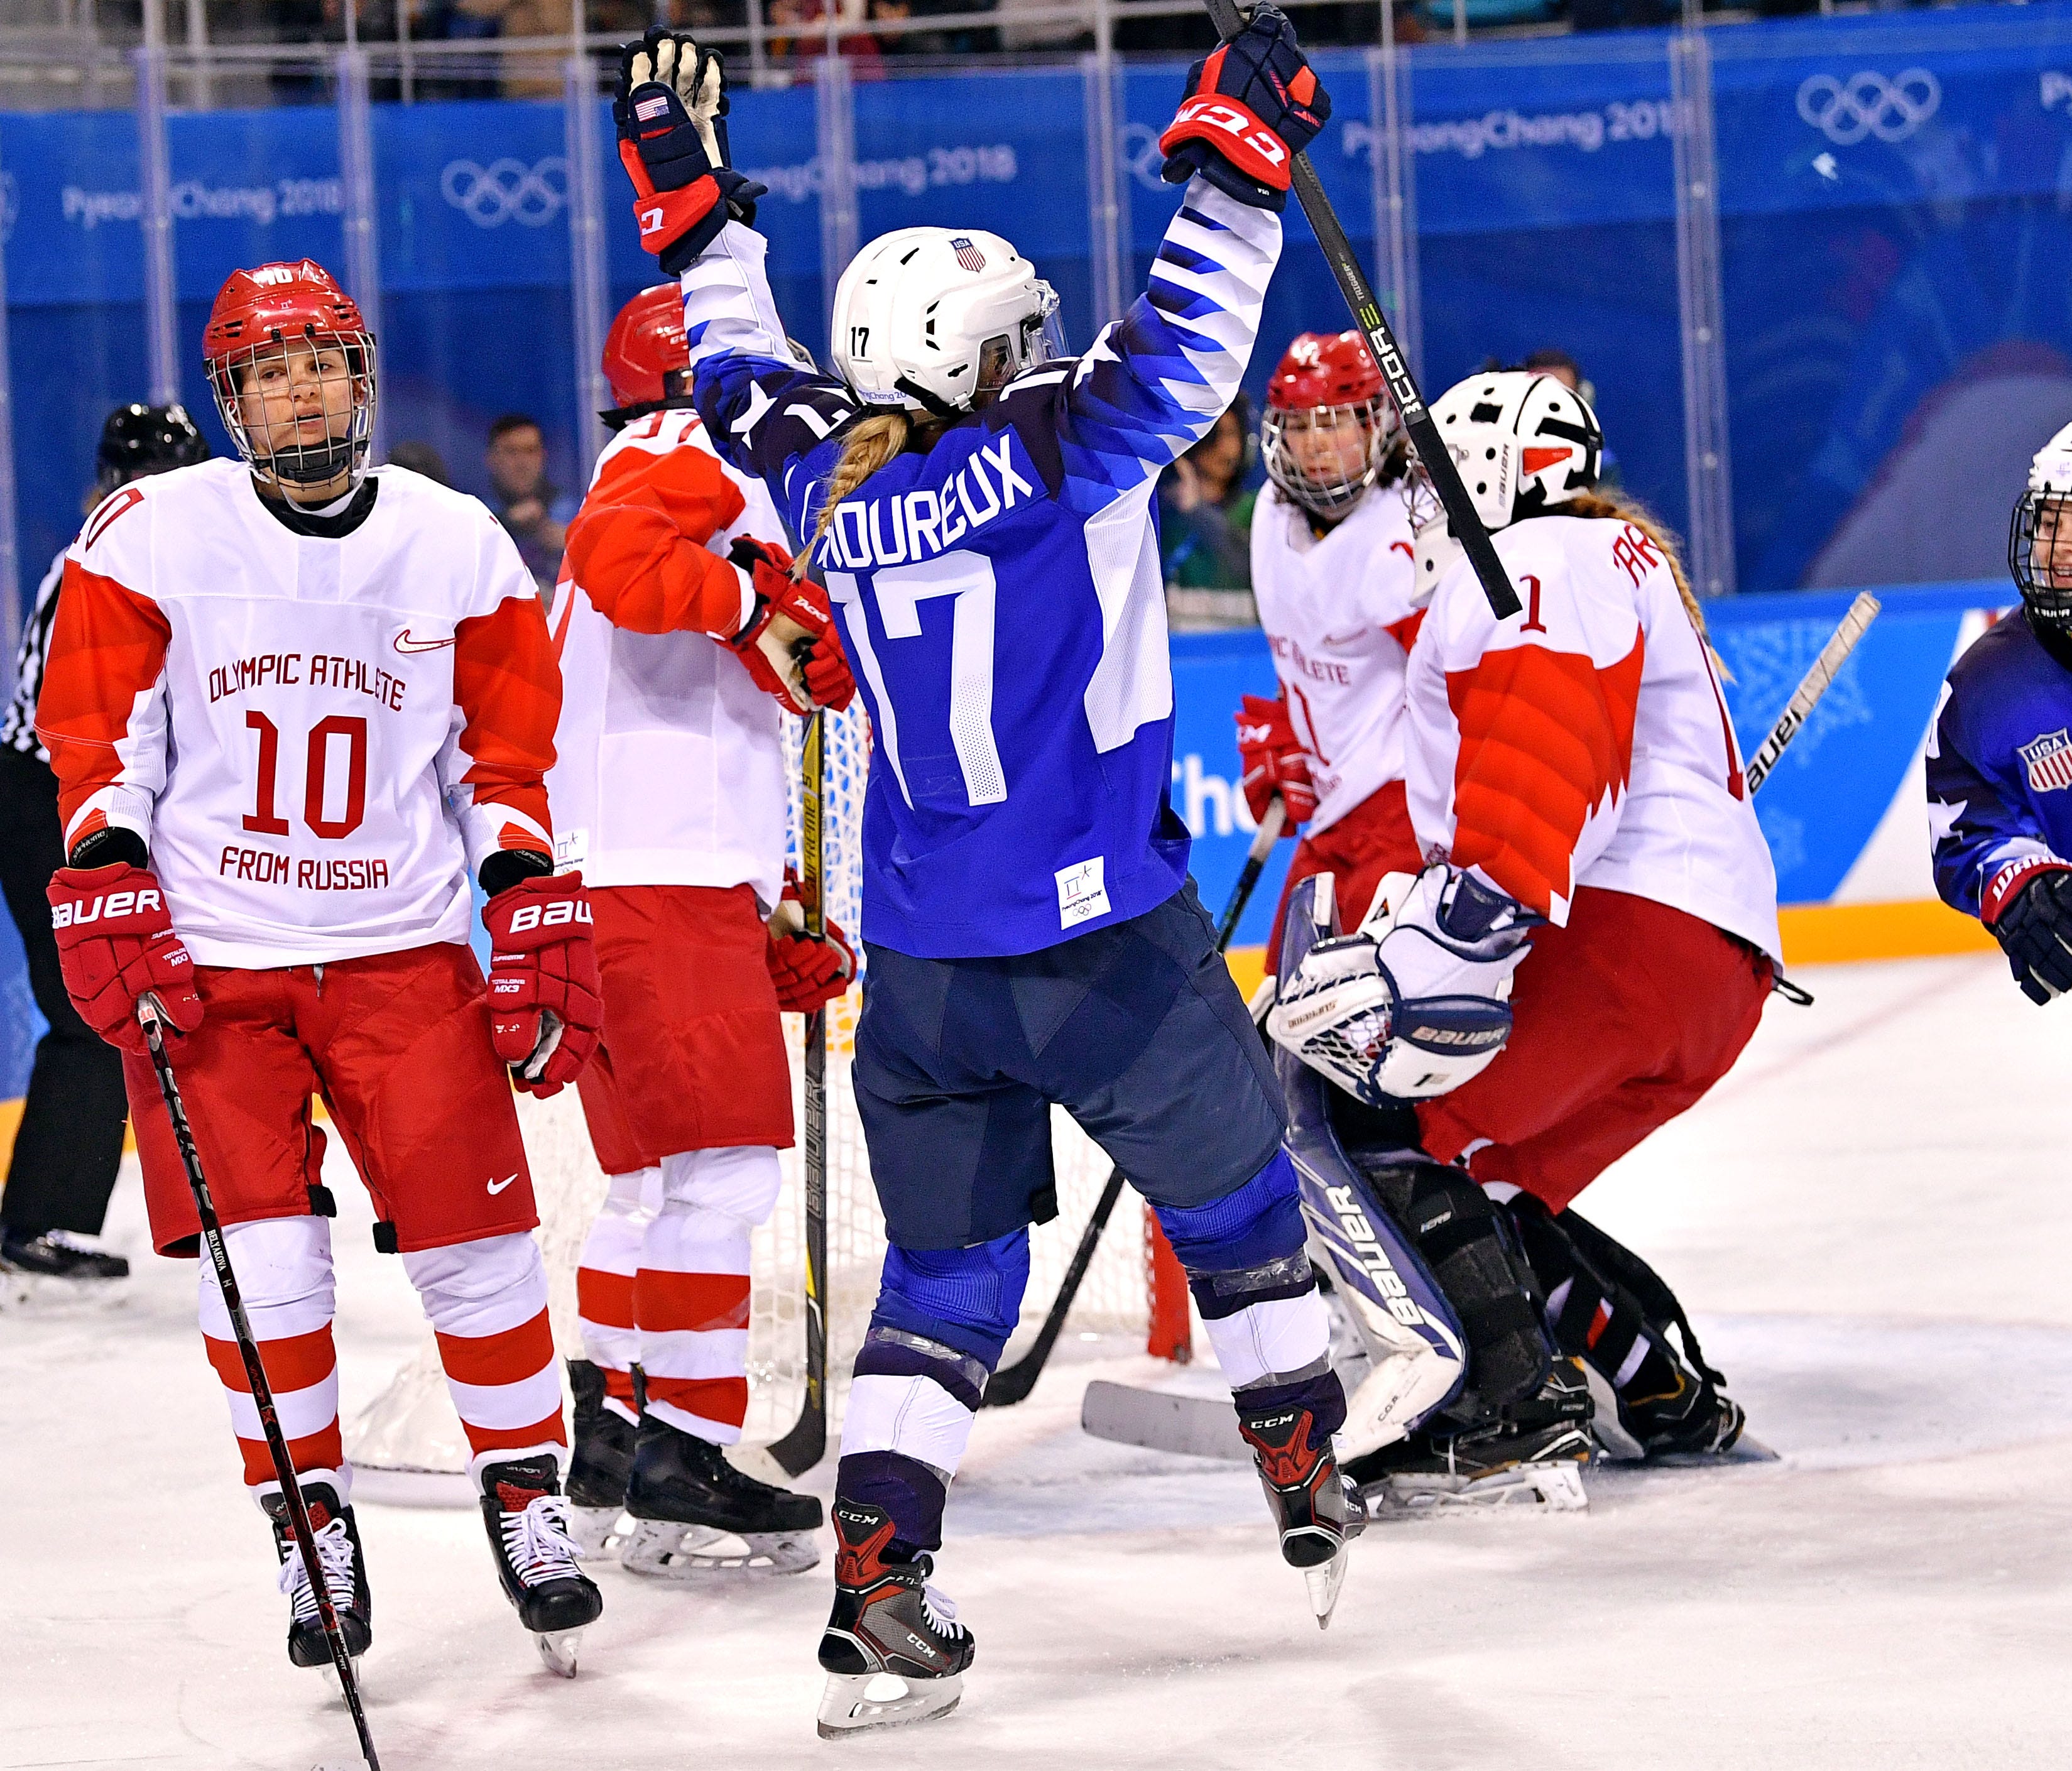 United States forward Jocelyne Lamoureux (17) celebrates a goal against Olympic Athletes from Russia in women's hockey group A play during the Pyeongchang 2018 Olympic Winter Games at Kwandong Hockey Centre.